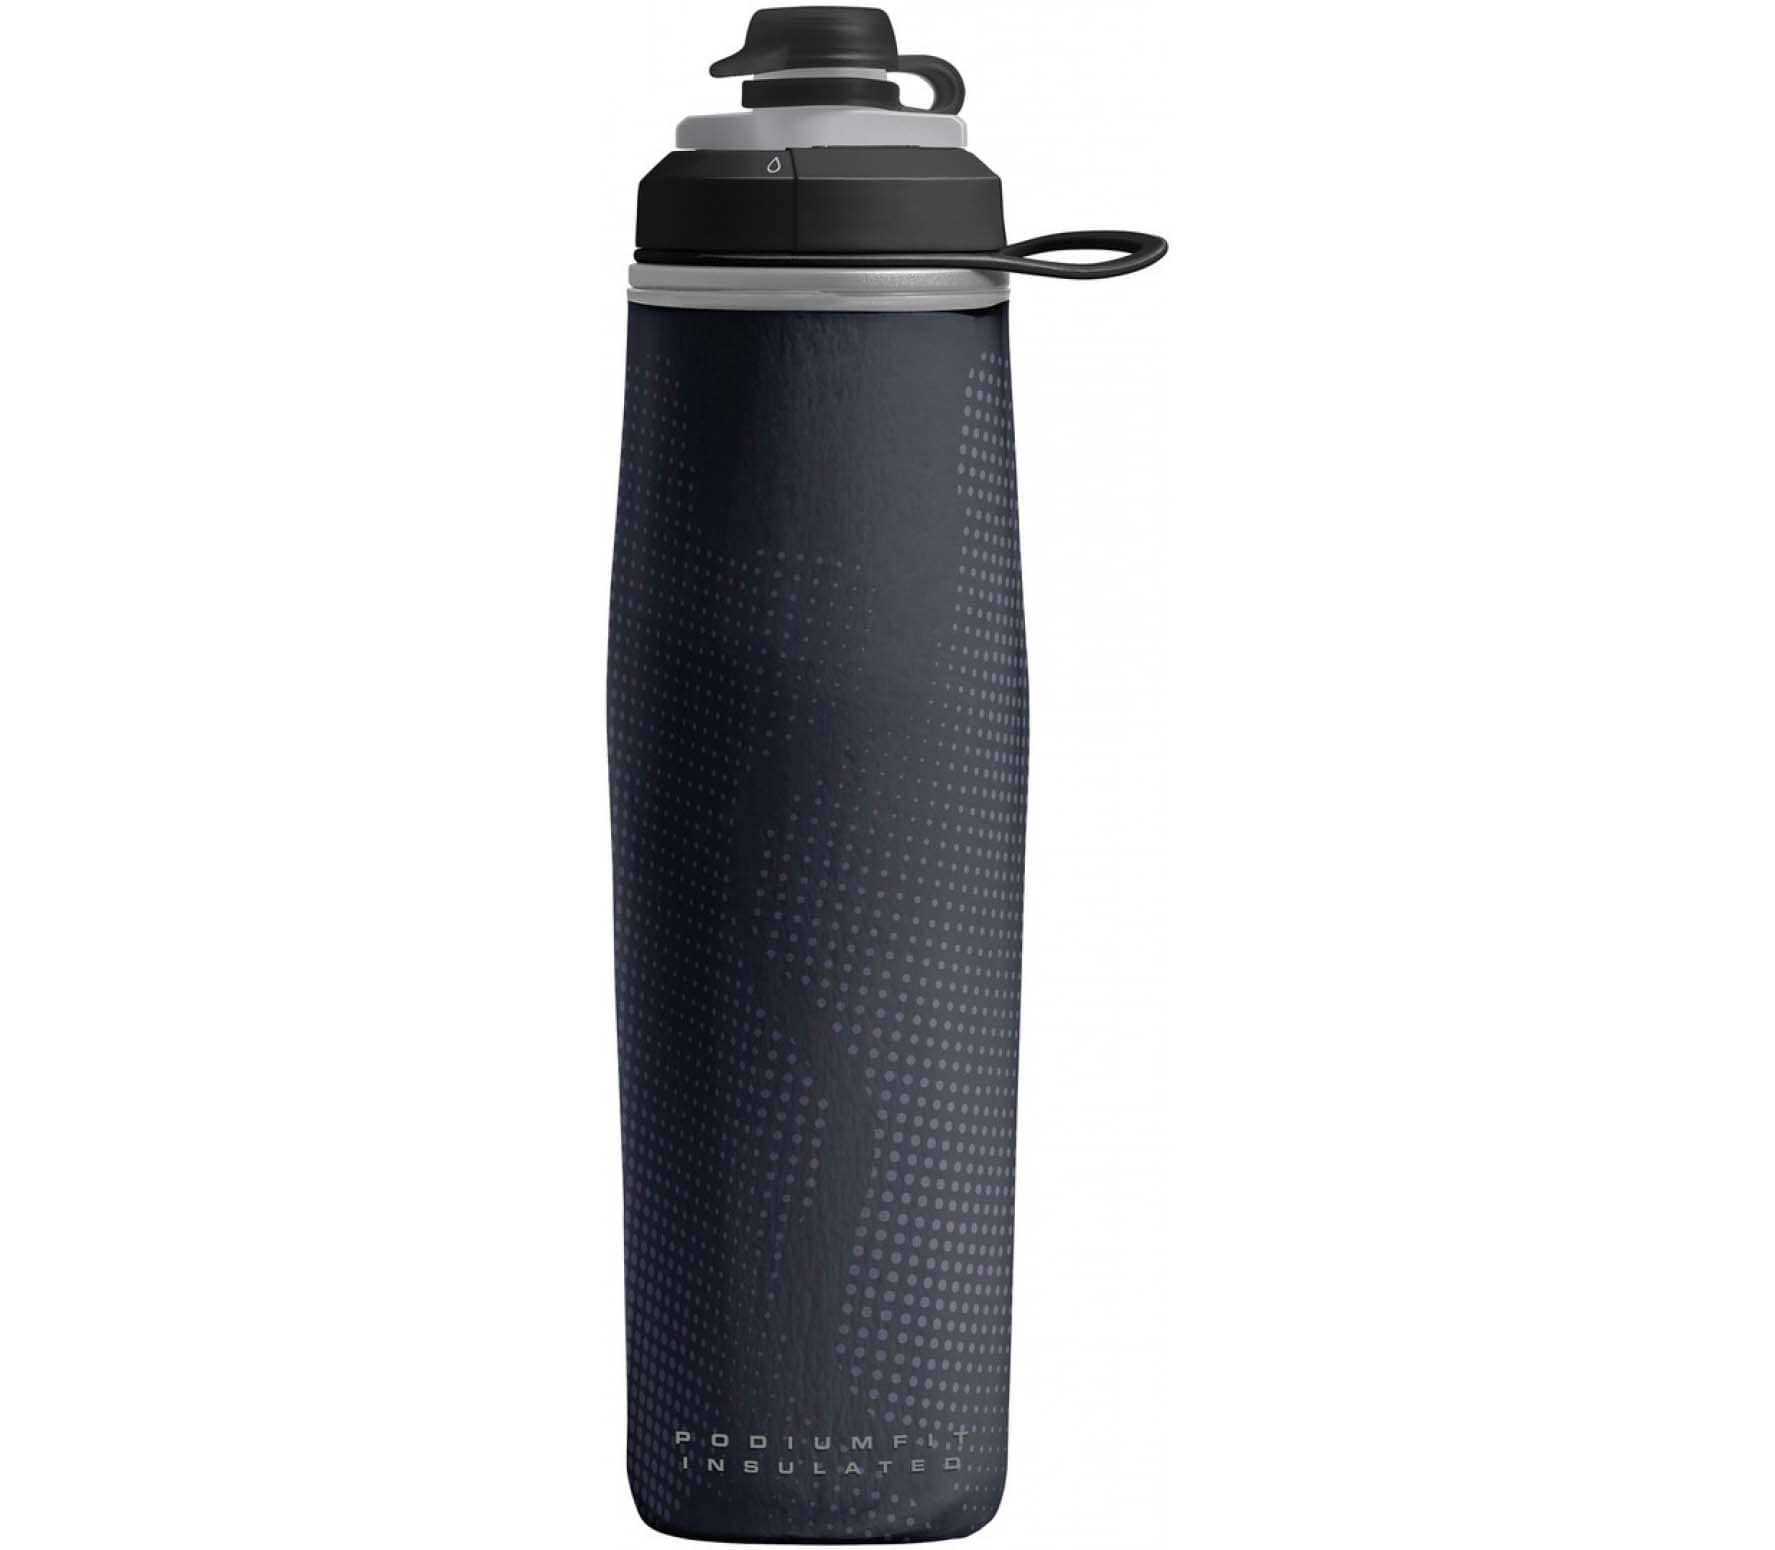 25oz INSULATED WATER BOTTLE SPORTS BPA FREE CAMELBAK PEAK FITNESS CHILL .74L 